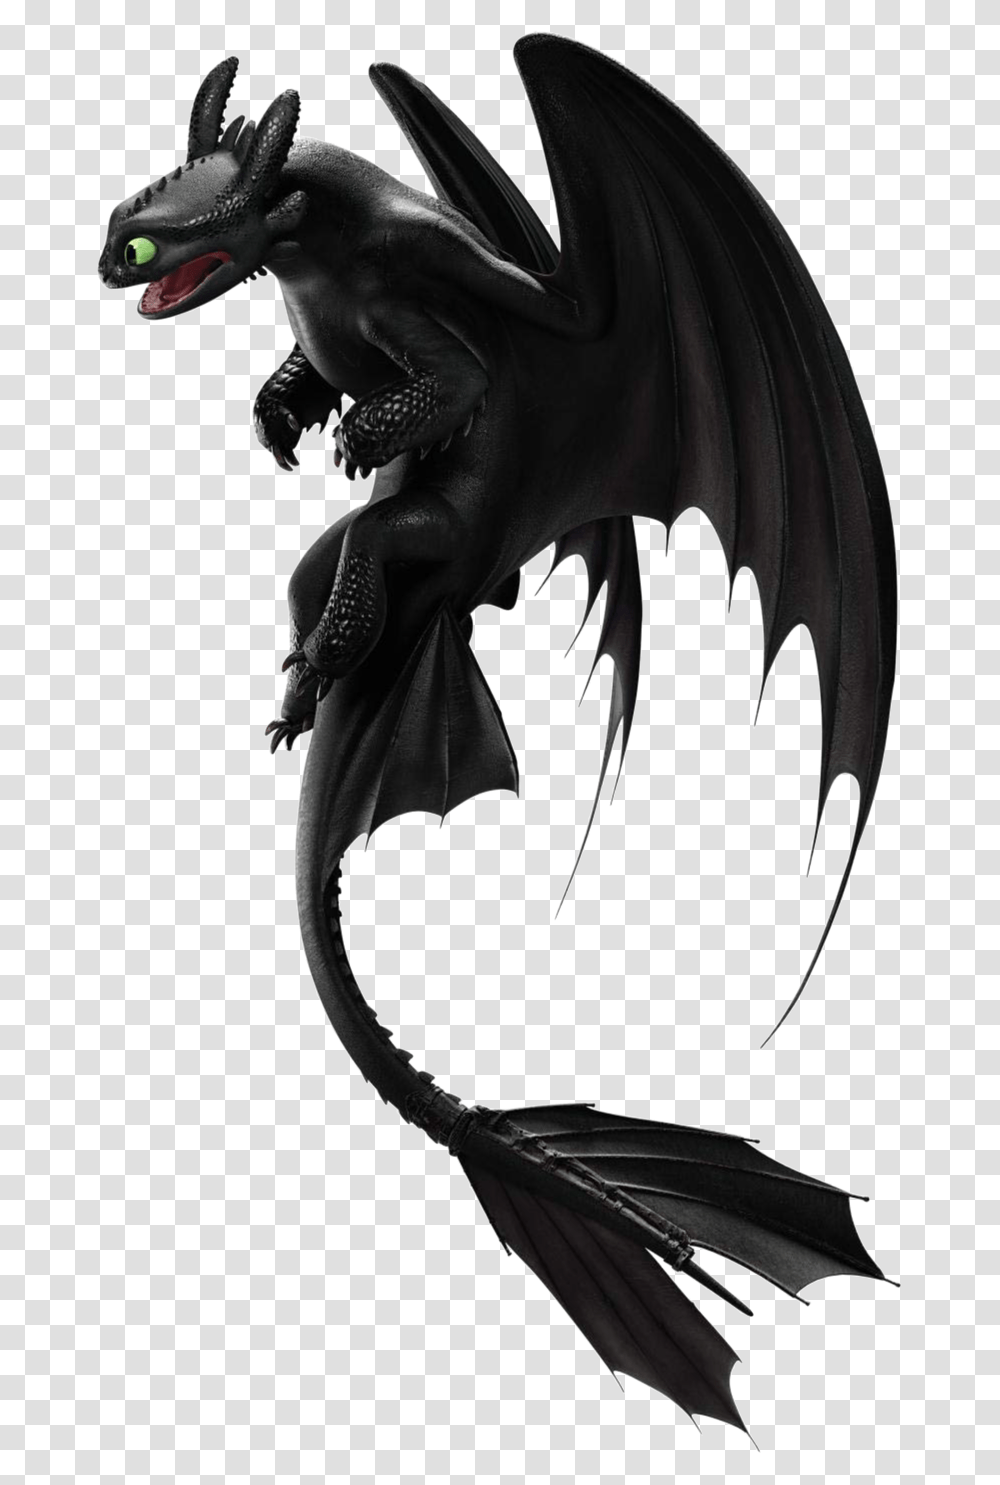 Toothless Nightfury Httyd3 Freetoedit Toothless And Light Fury Transparent Png